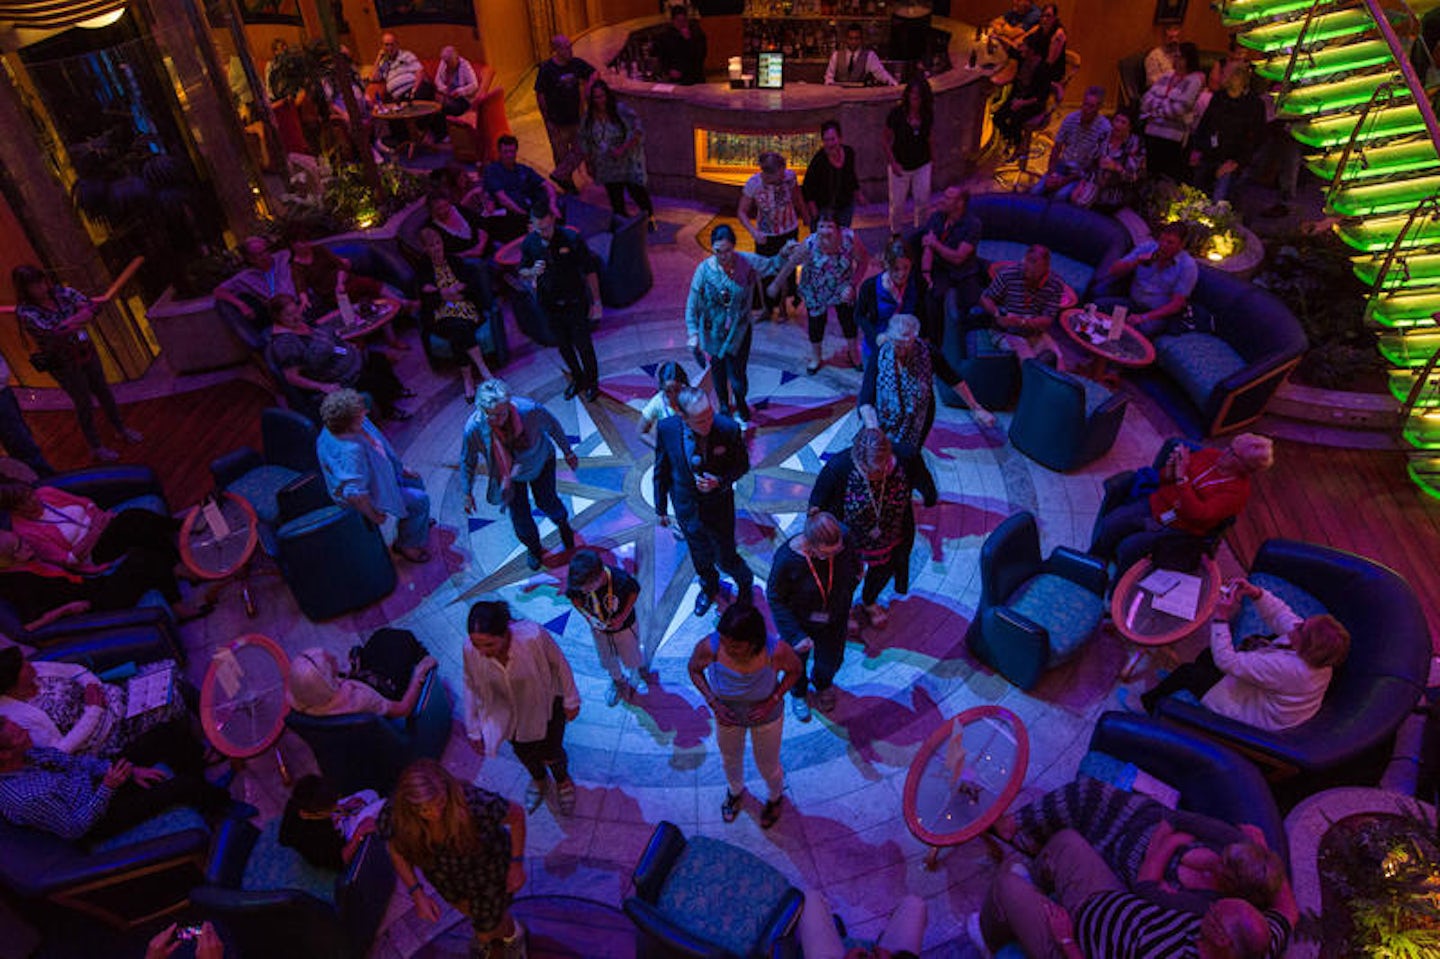 Dance Events on Radiance of the Seas